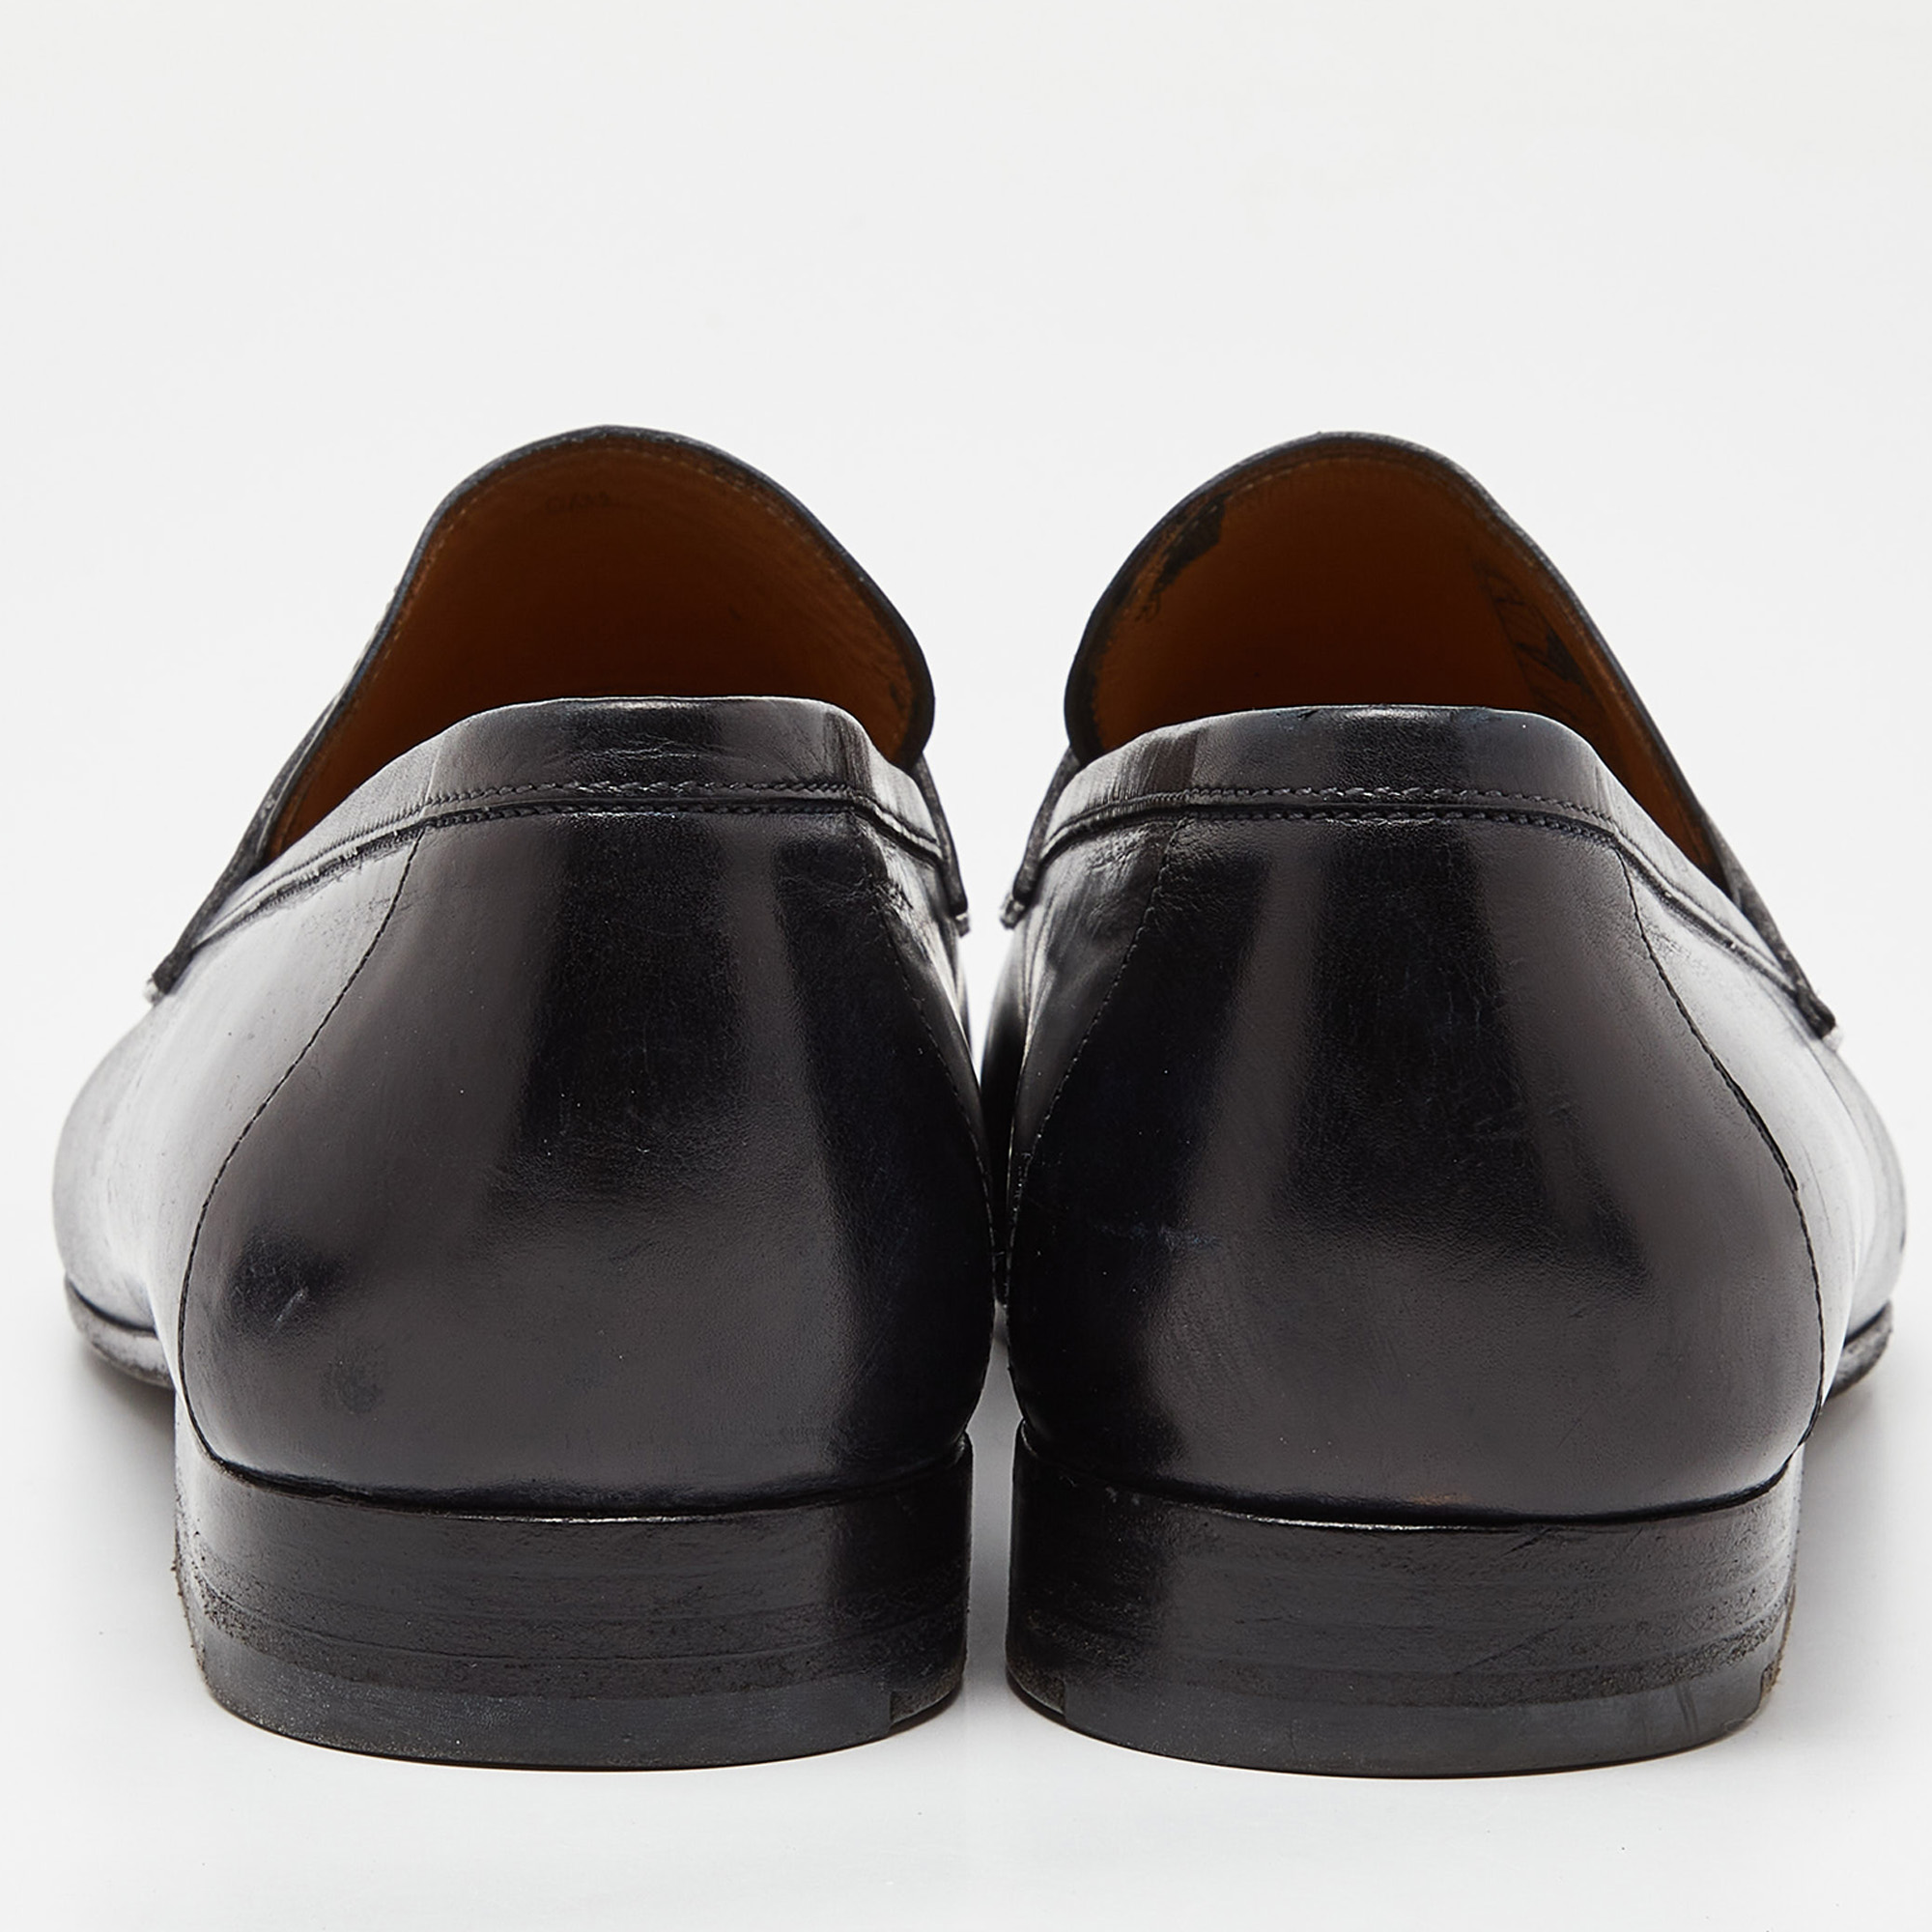 Berluti Black Leather Penny Slip On Loafers Size 45